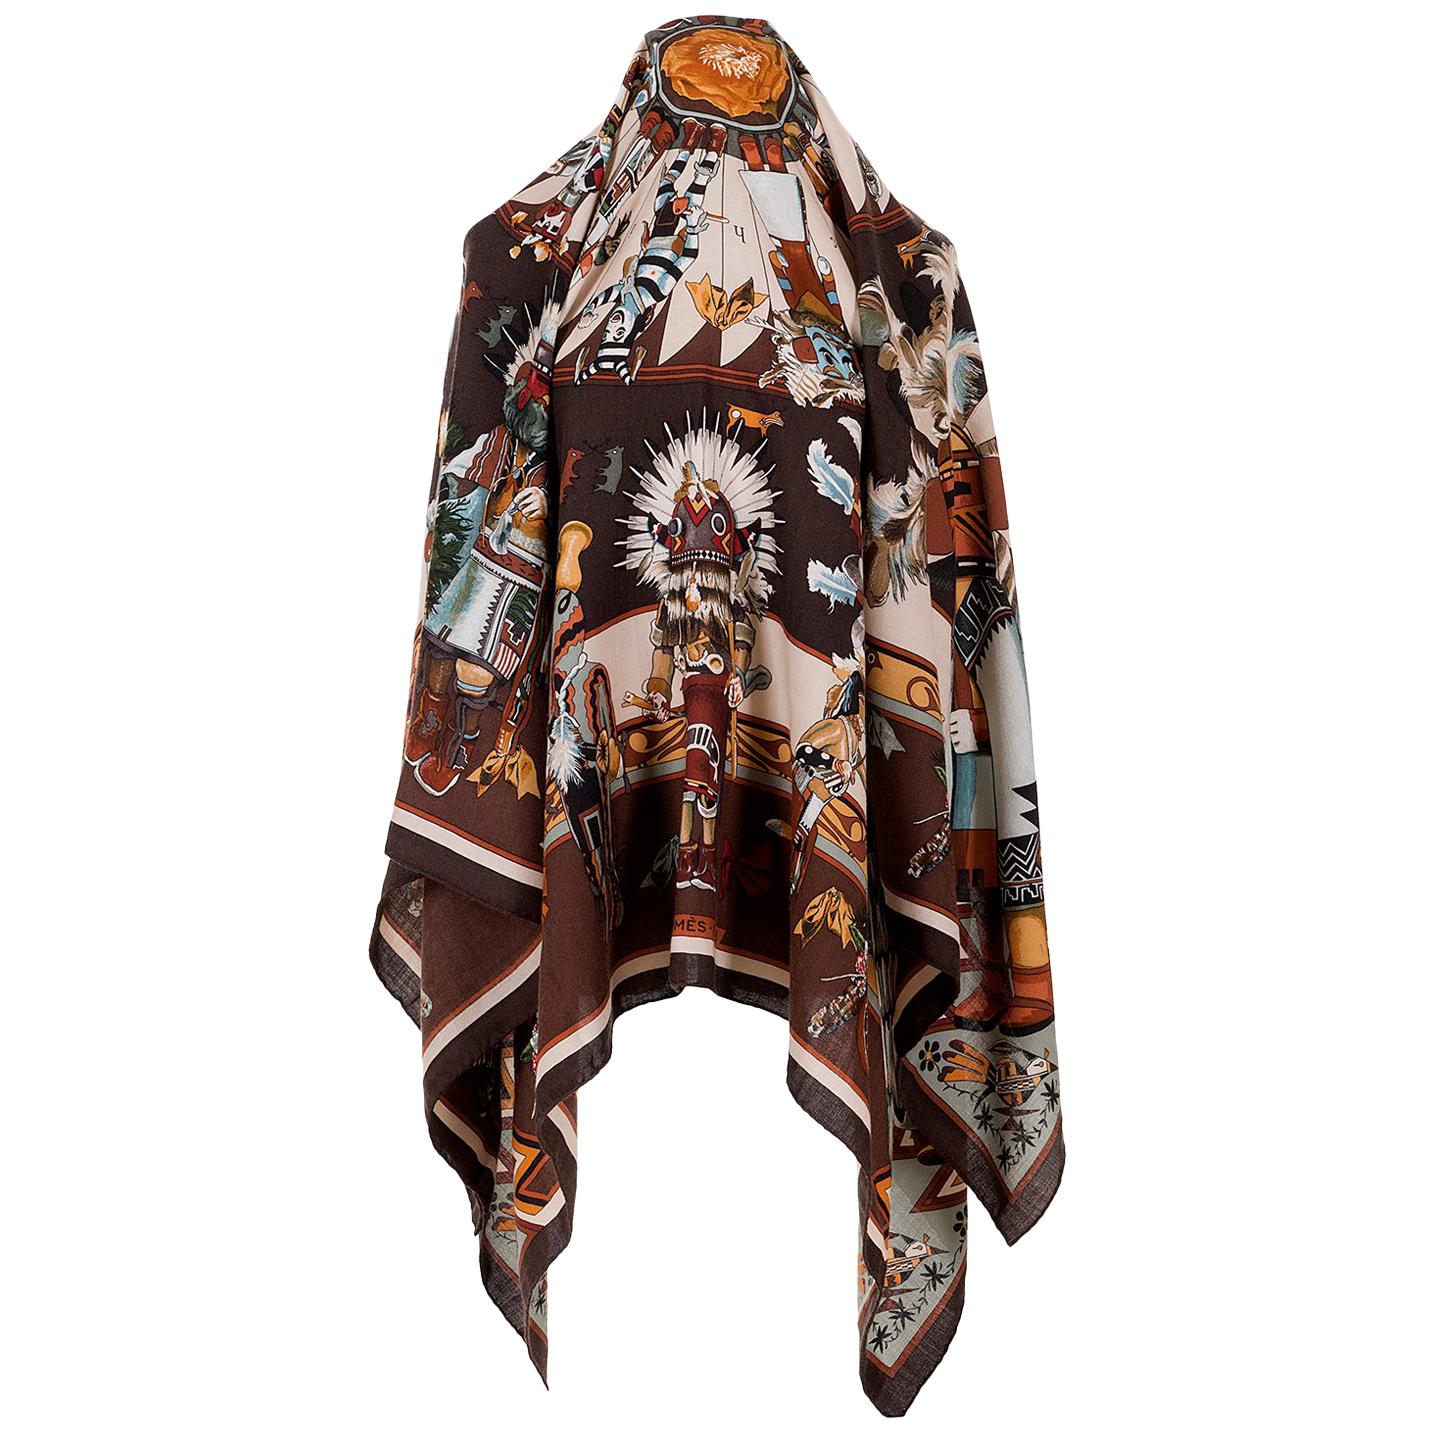 Hermes Vintage Silk and Cashmere Kachinas Shawl by Kermit Oliver